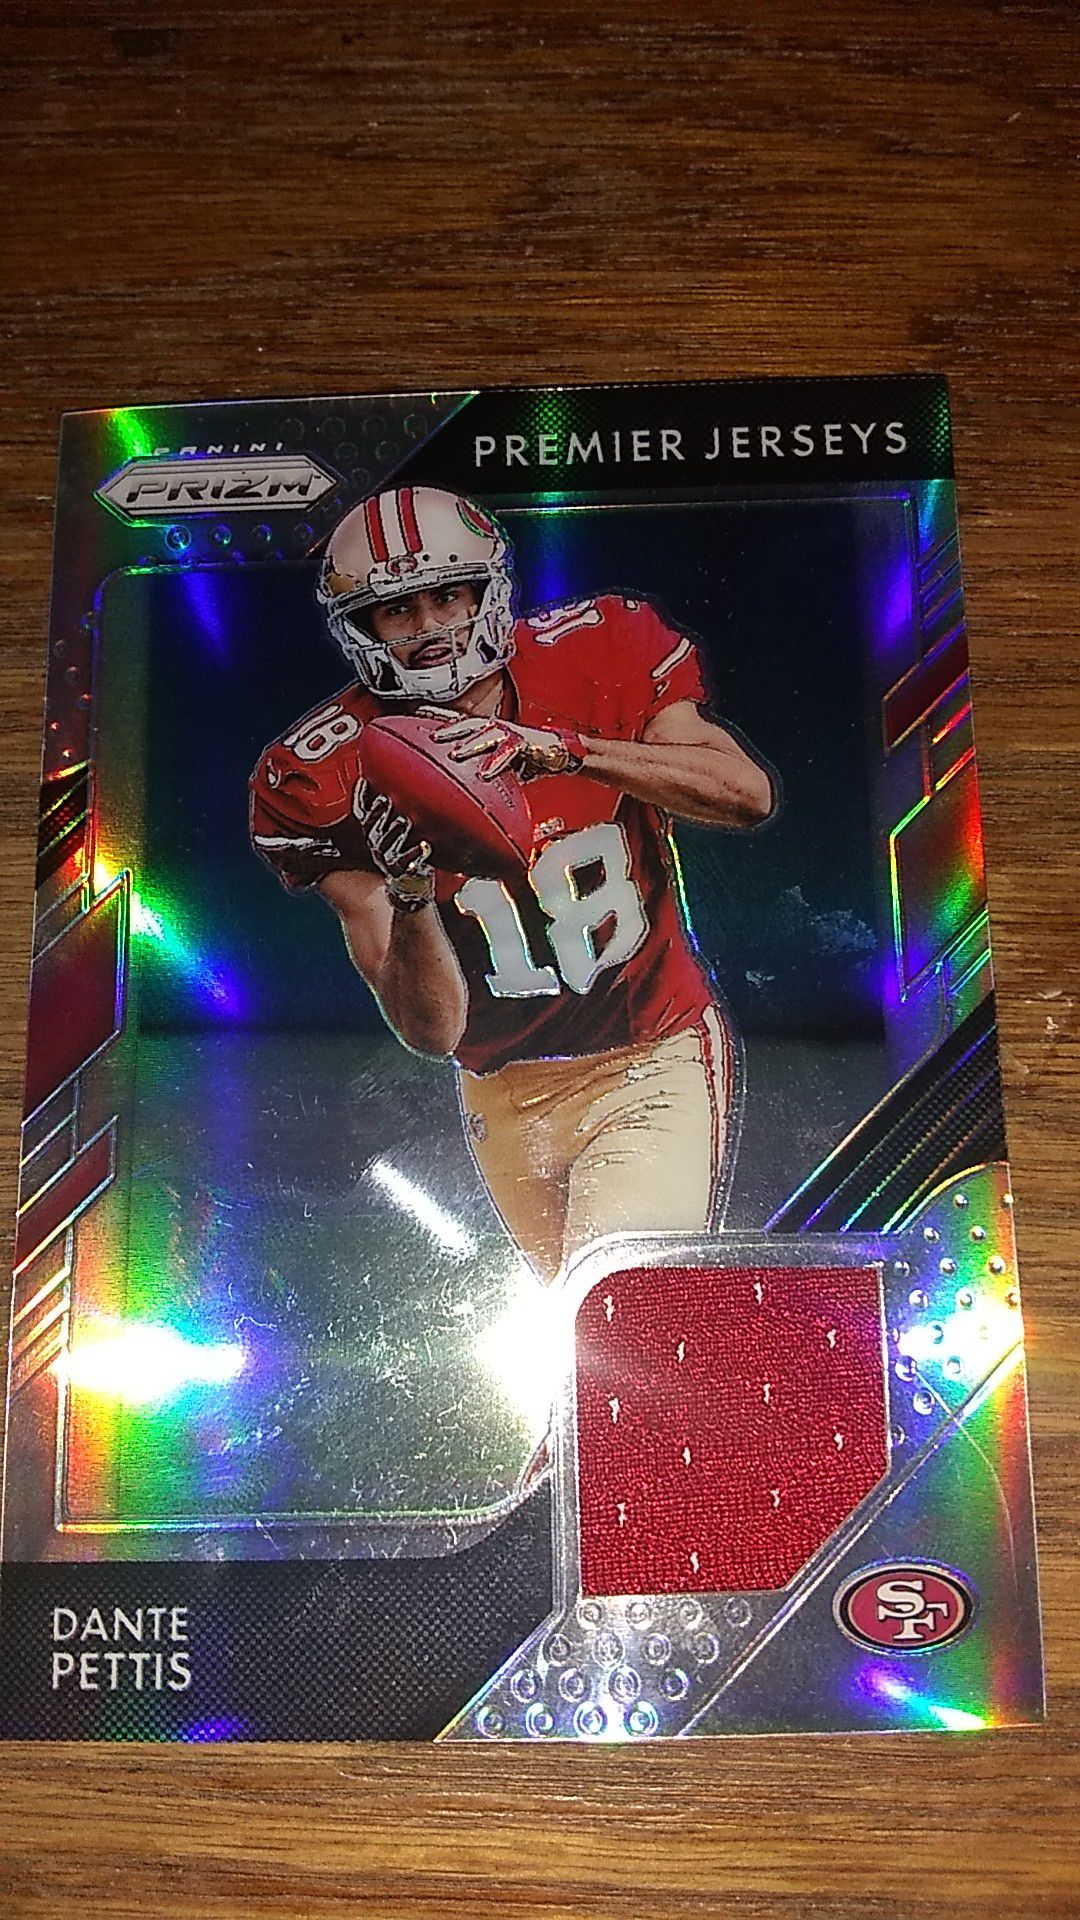 Dante Pettis 49'ers Baseball card collectable limited edition